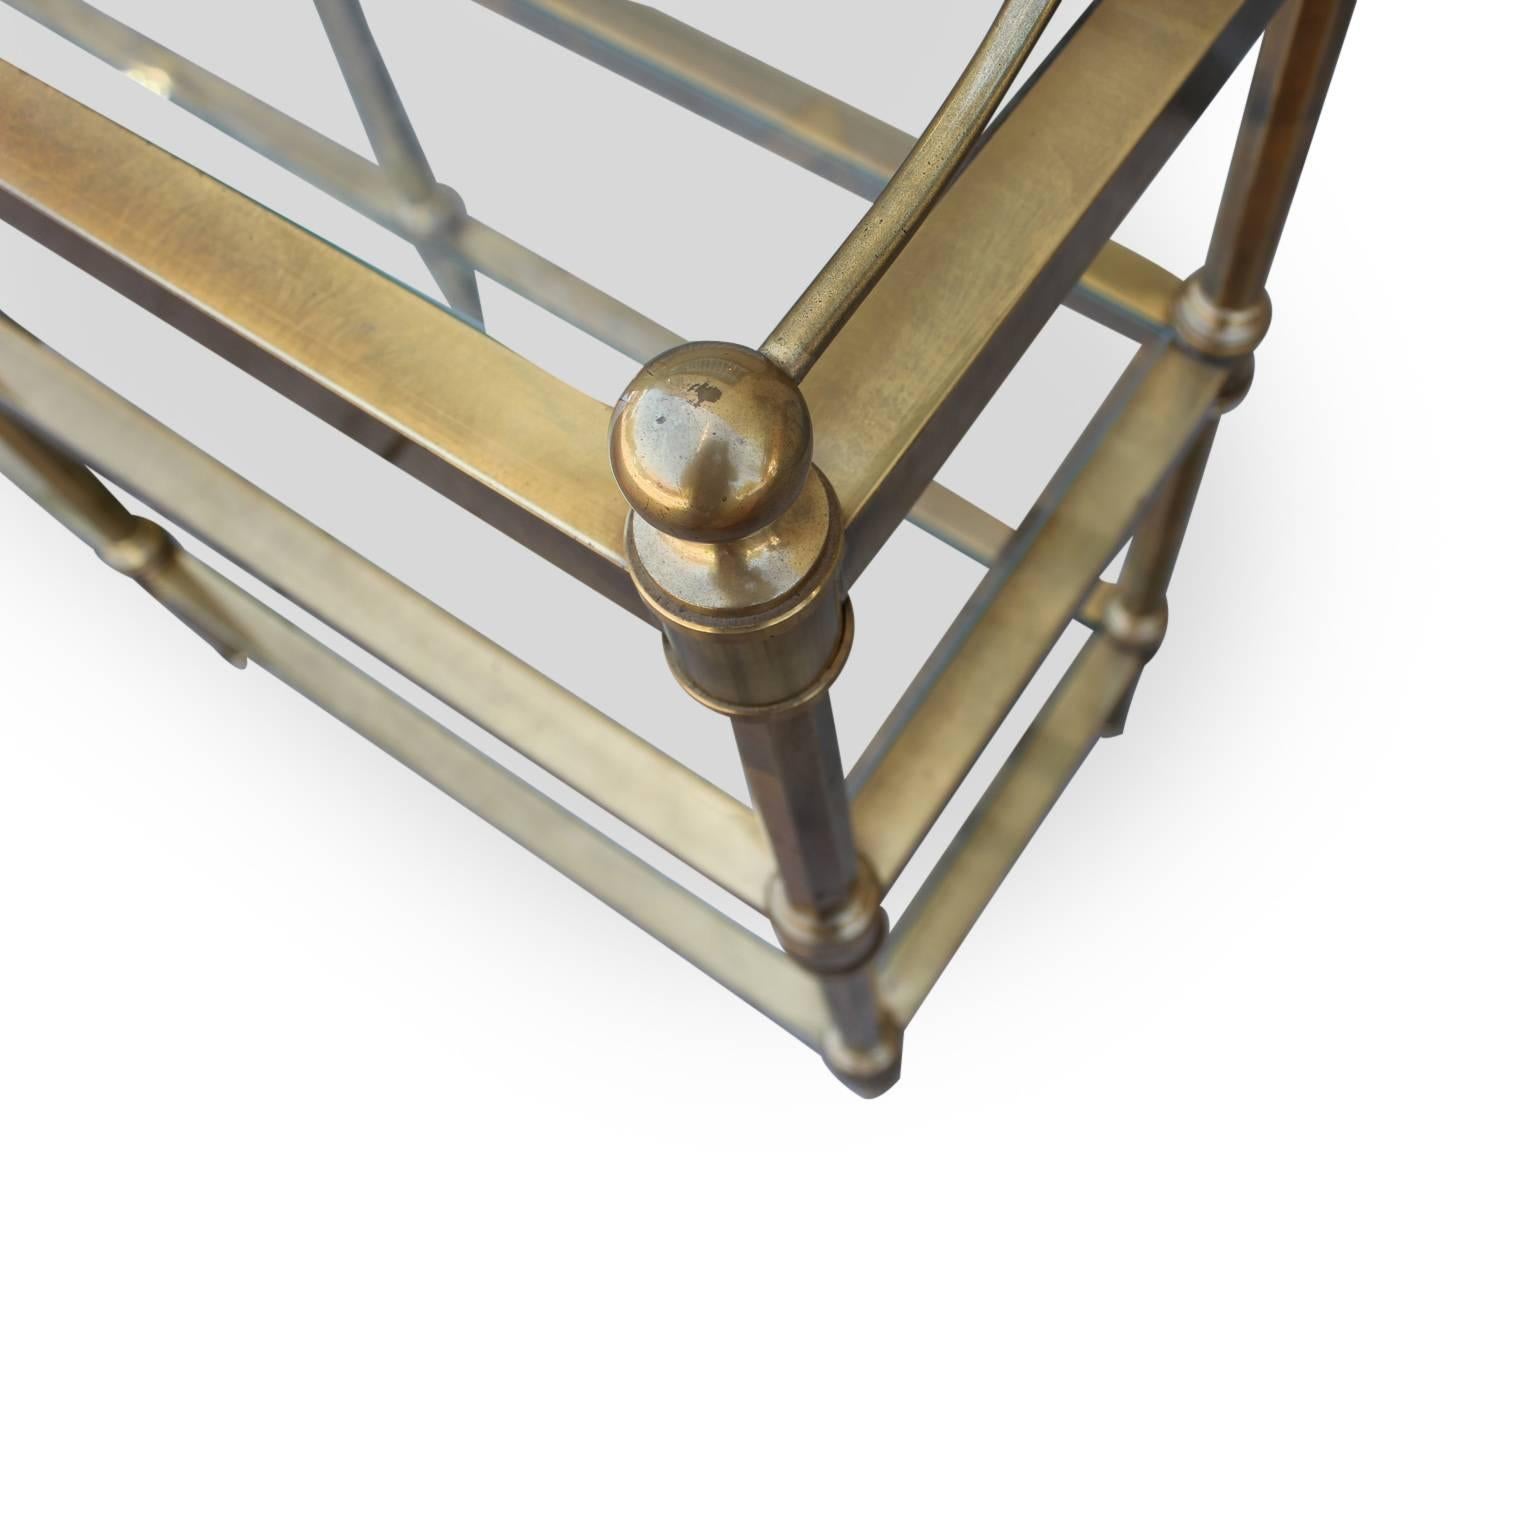 Heavy solid brass French shelf or display with glass. The piece is very well made and is very high quality.